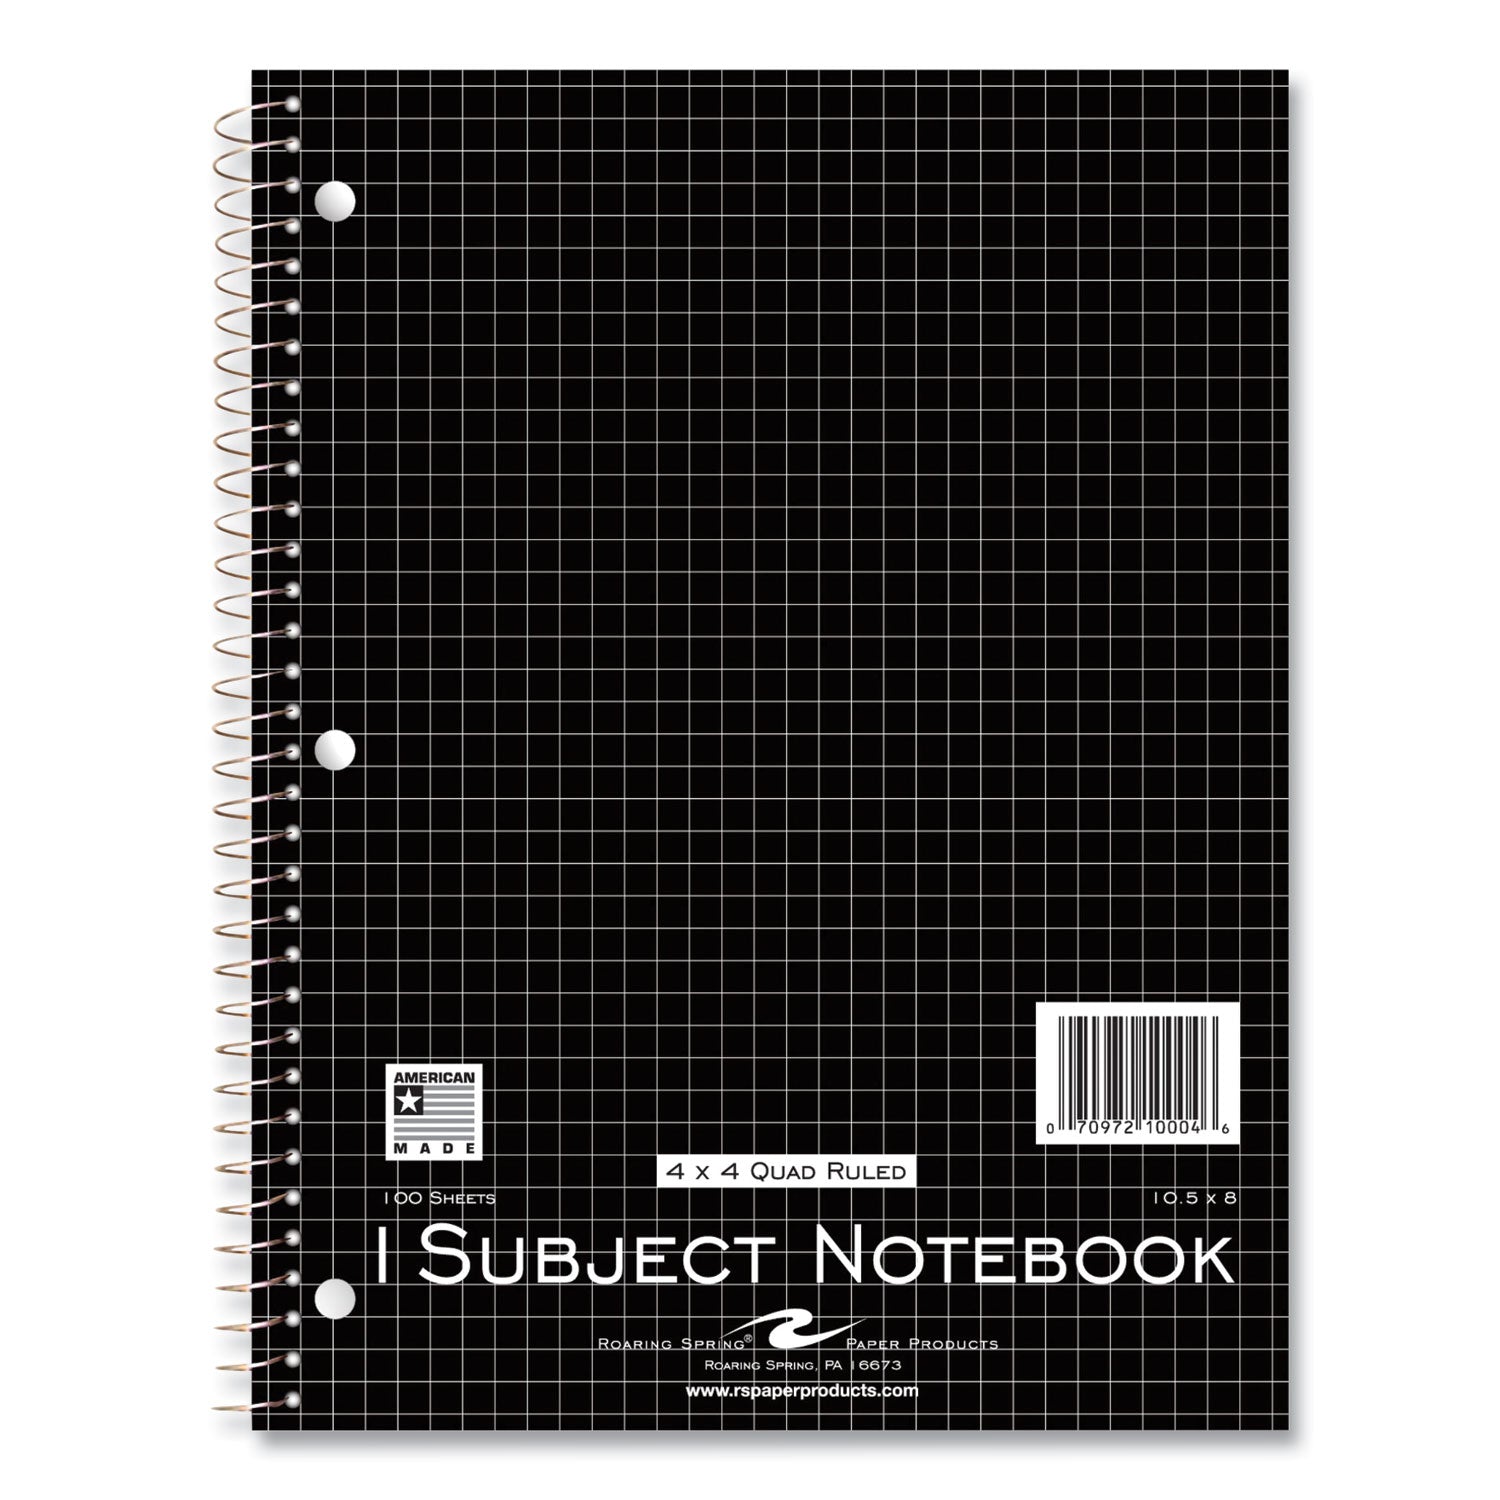 subject-wirebound-promo-notebook-1-subject-4-sq-in-quad-rule-asst-cover-100-105x8-sheets-24-ct-ships-in-4-6-bus-days_roa10004cs - 2